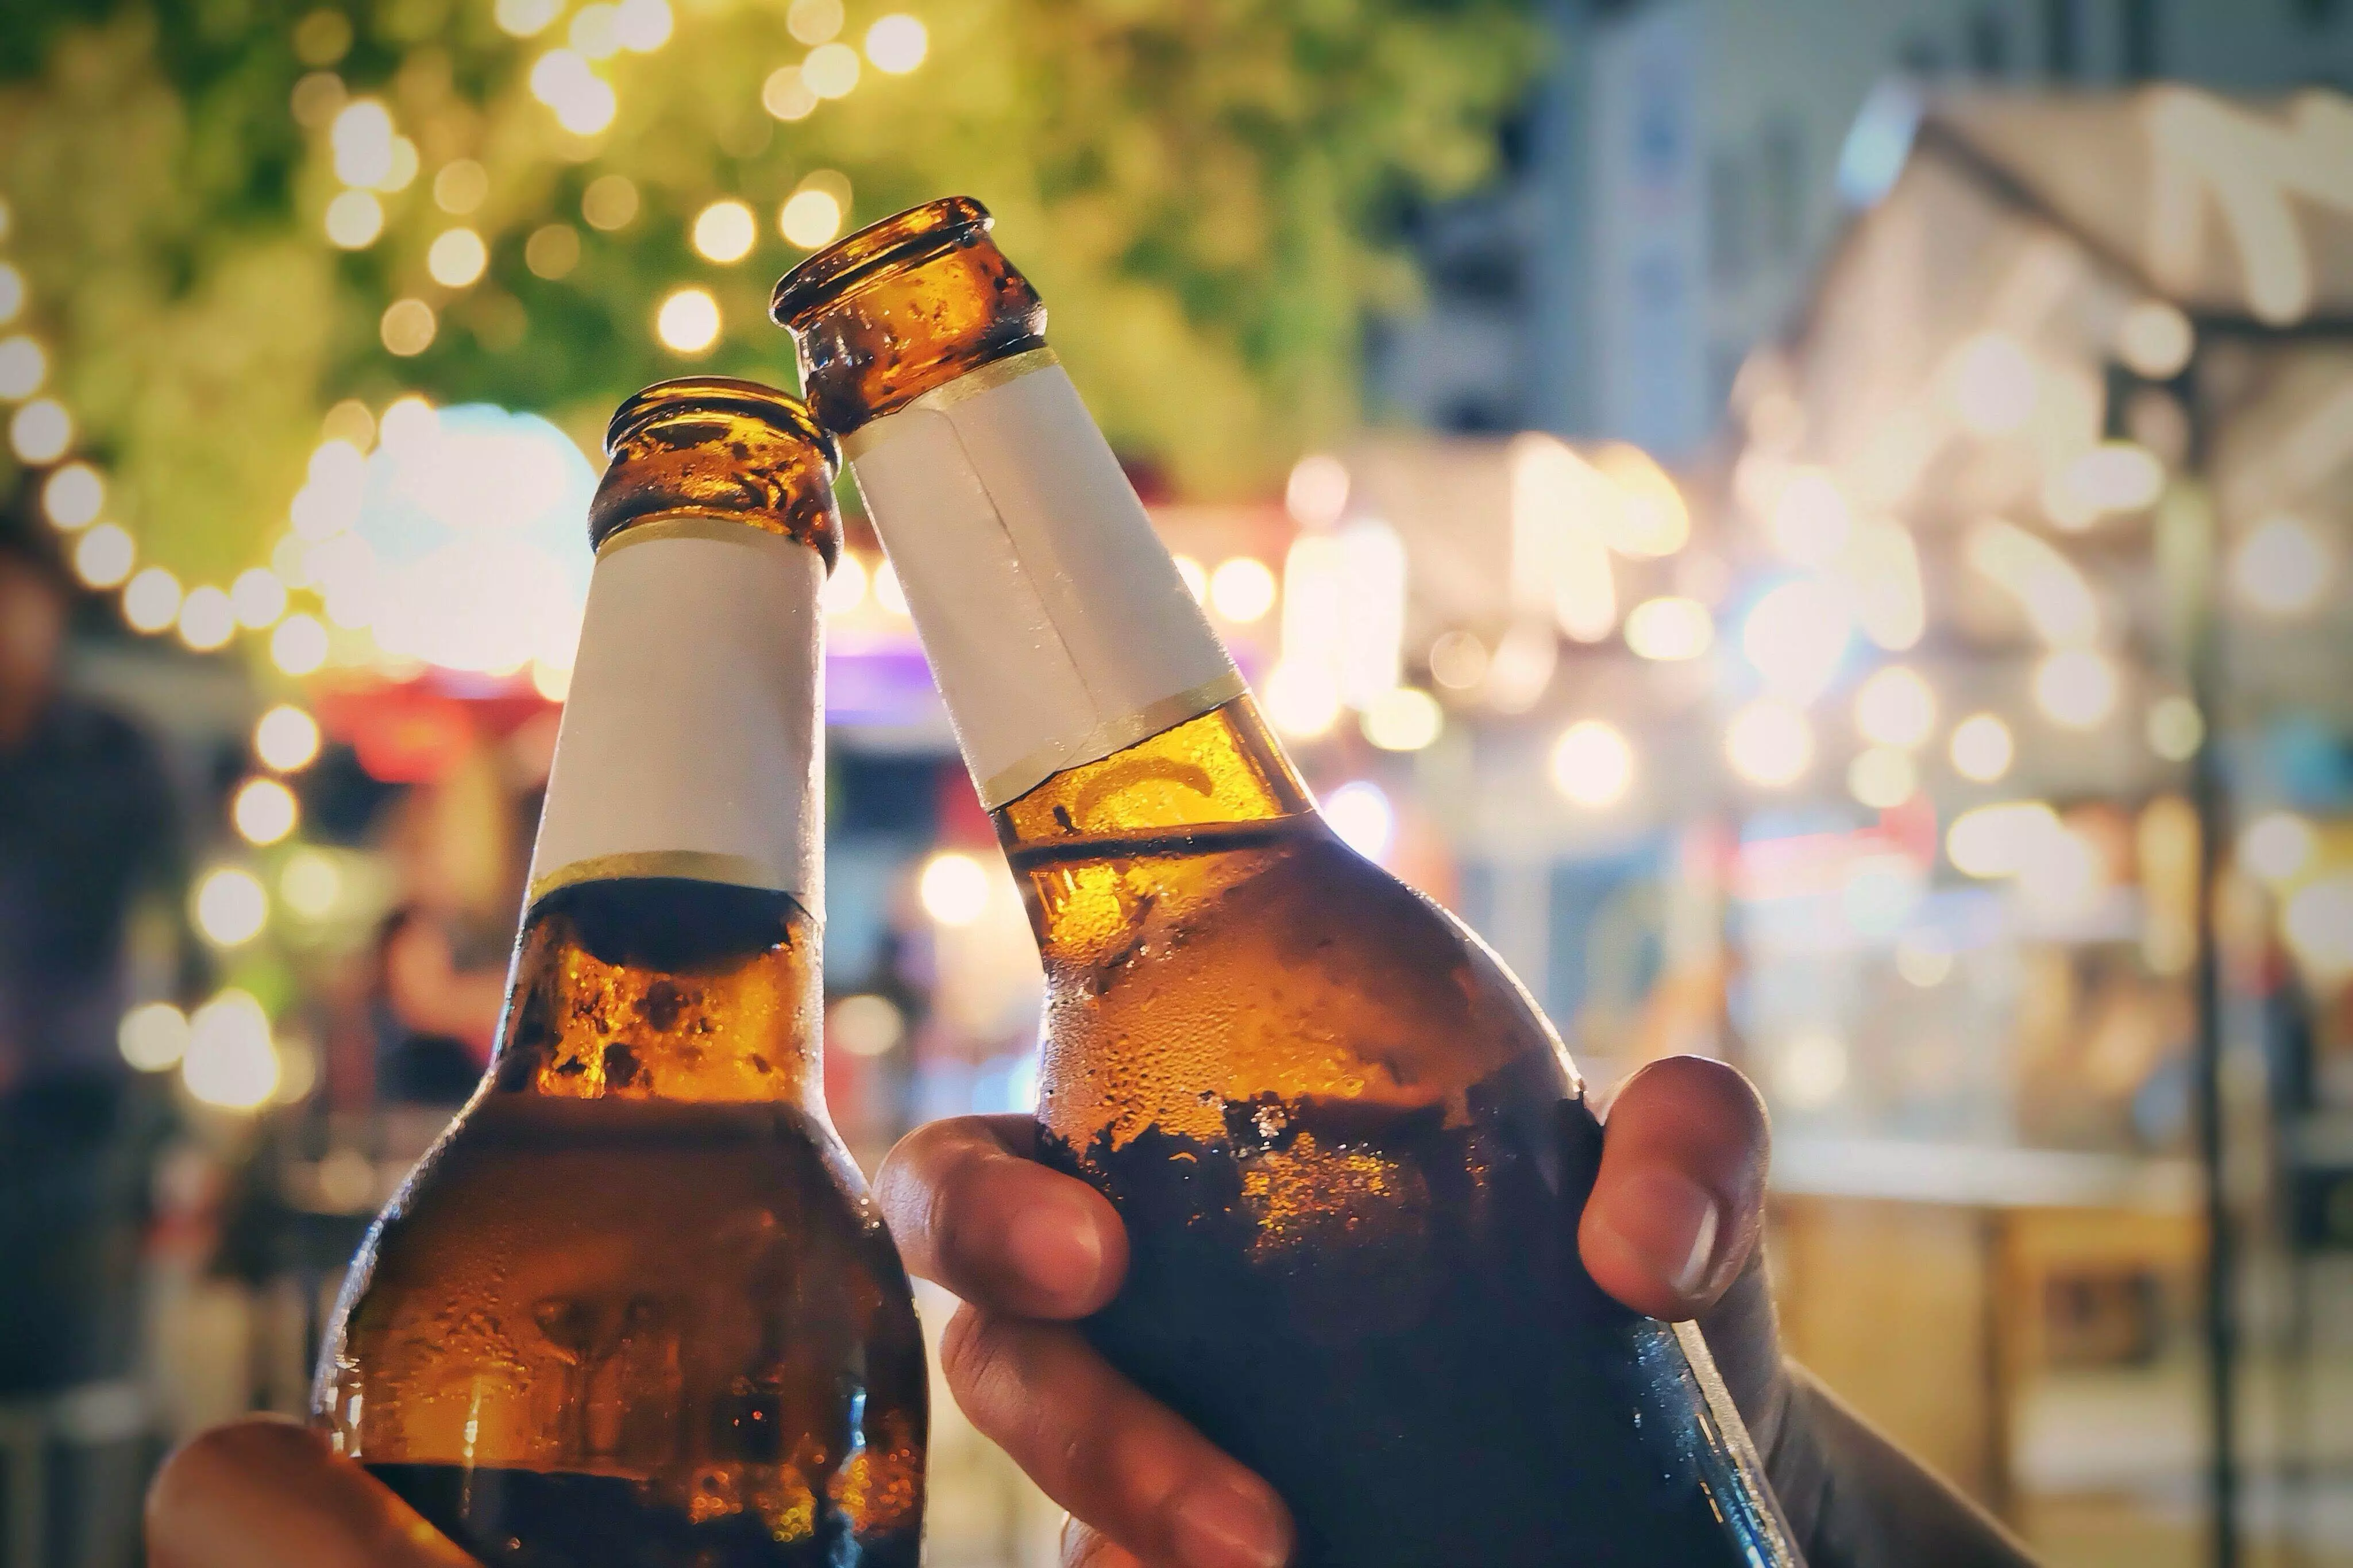 Daily Beer Consumption: Unveiling the Hidden Health Risks